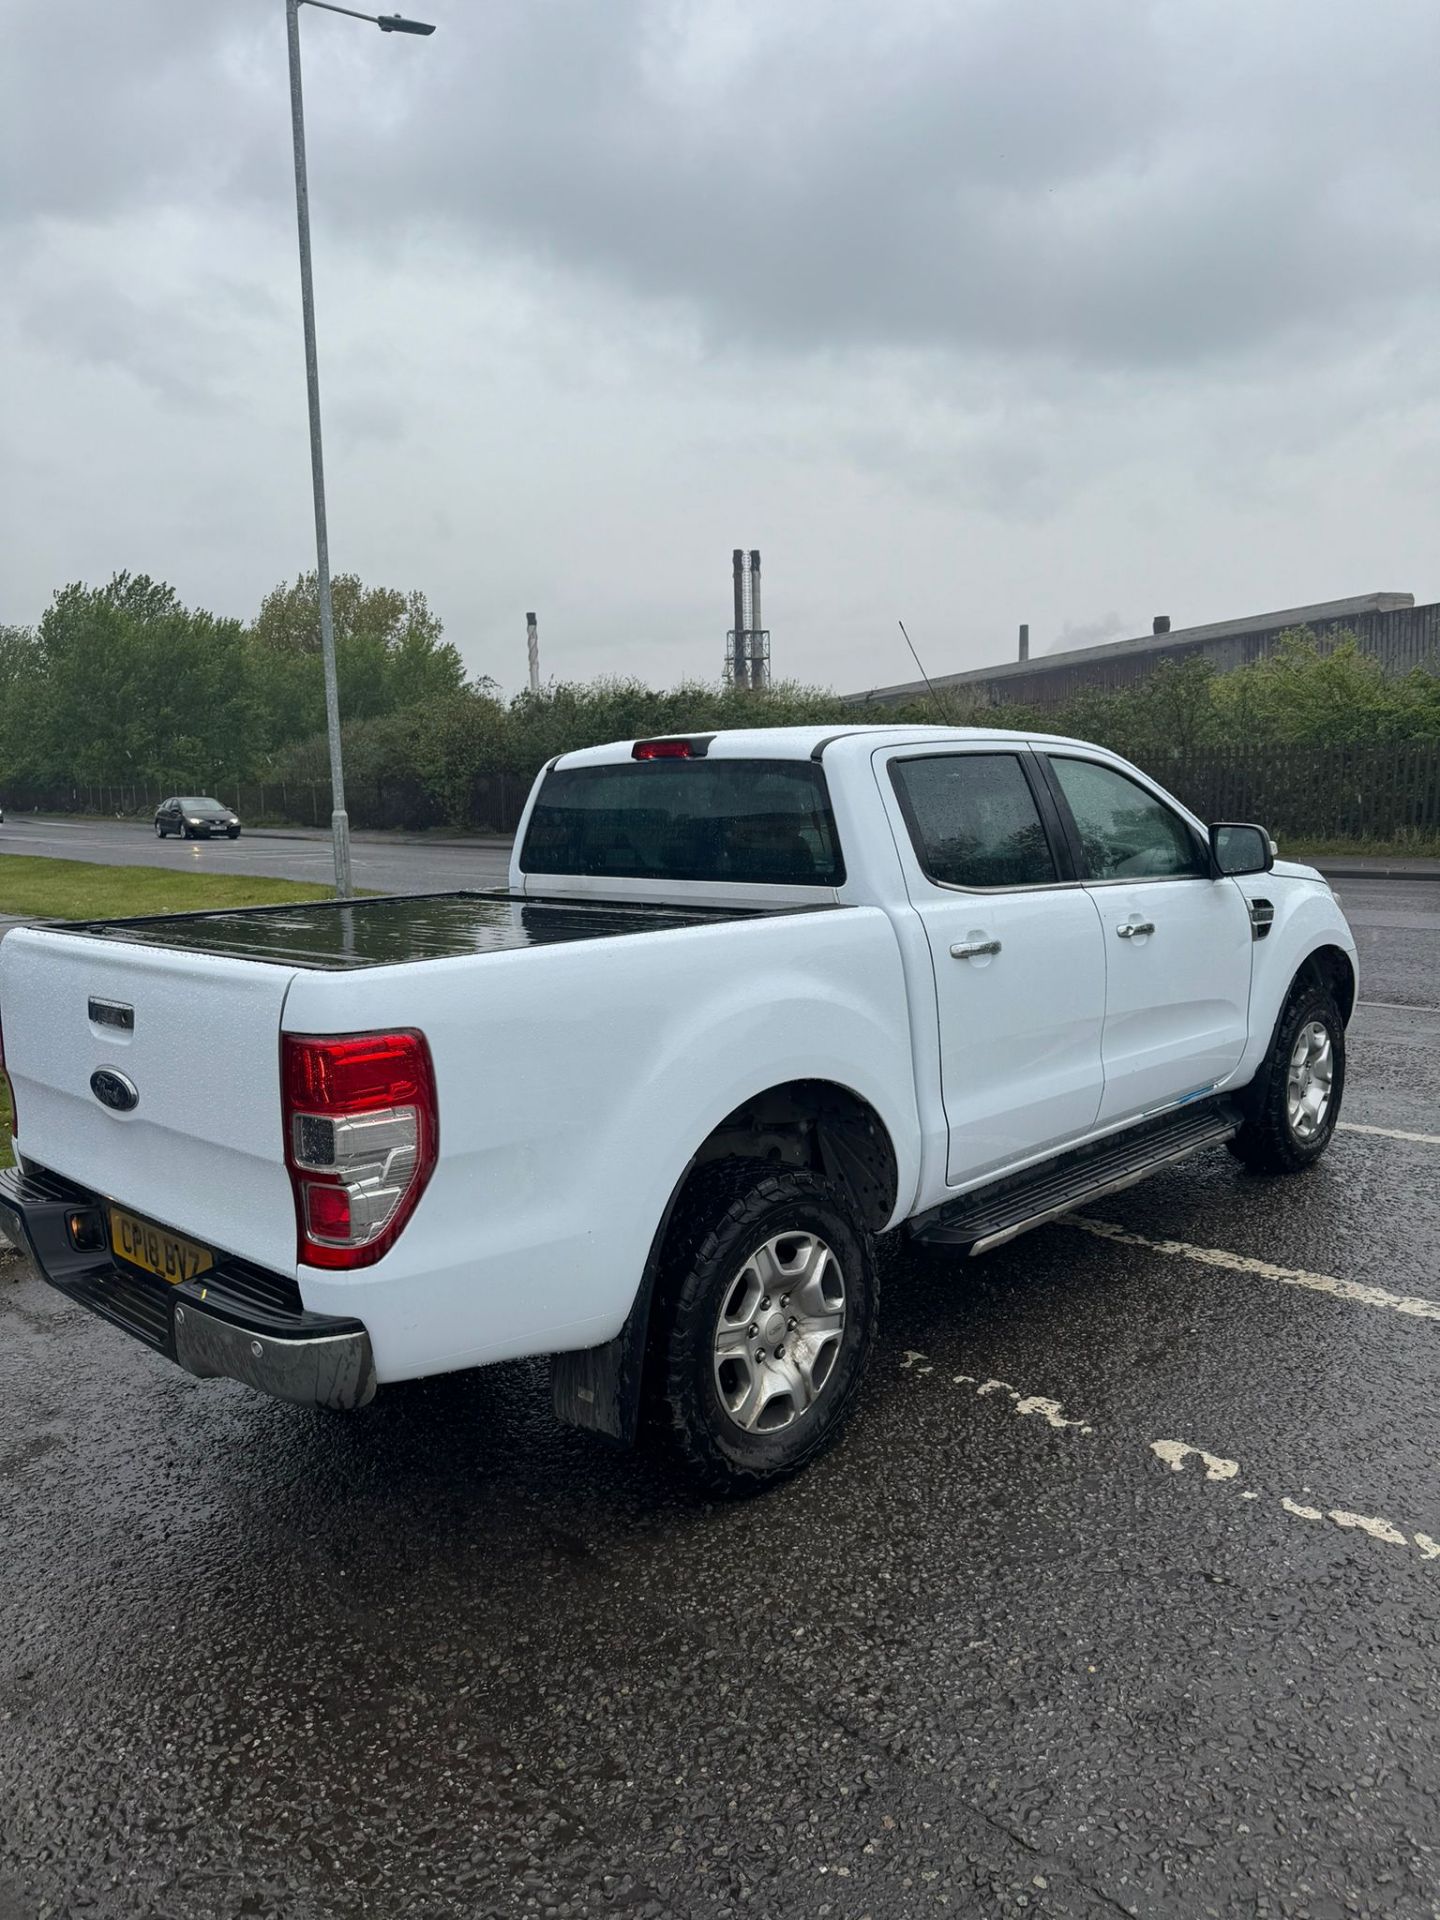 2018 18 FORD RANGER LIMITED PICK - 133K MILES - LEATHER SEATS - ALLOY WHEELS WITH BF GOODRICH TYRES - Image 6 of 12